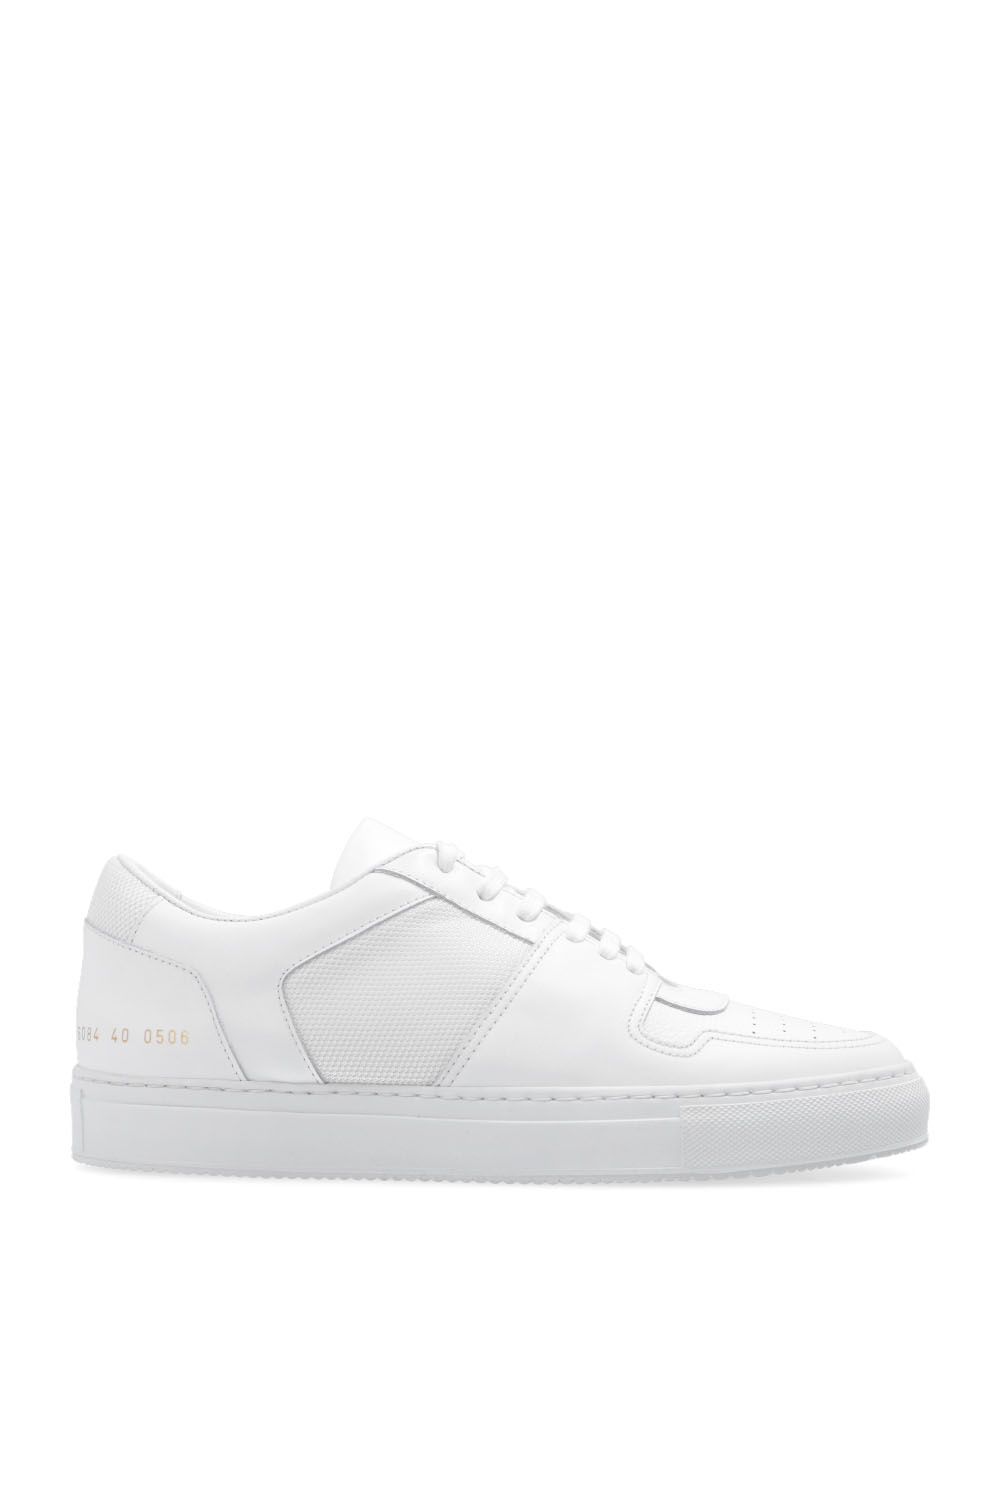 Common Projects ‘Decades Low’ sneakers Women's Shoes Vitkac